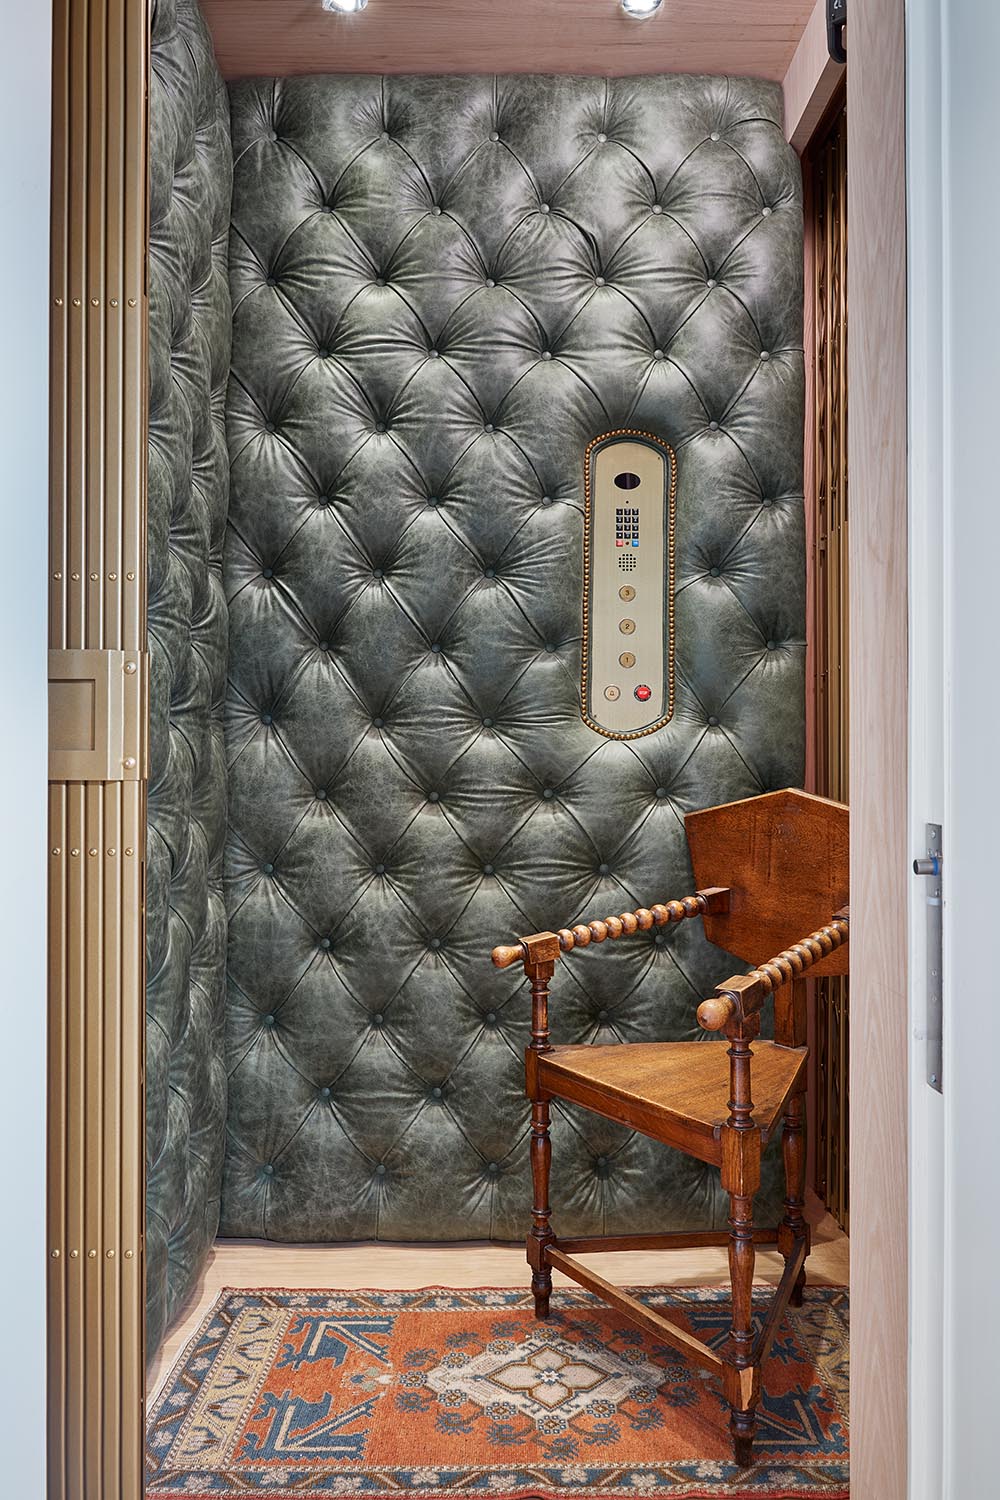 Green, tufted leather covers the walls of the elevator designed by Jared Hughes at the Flower Atlanta Showhouse. An antique chair and rug are in the elevator.